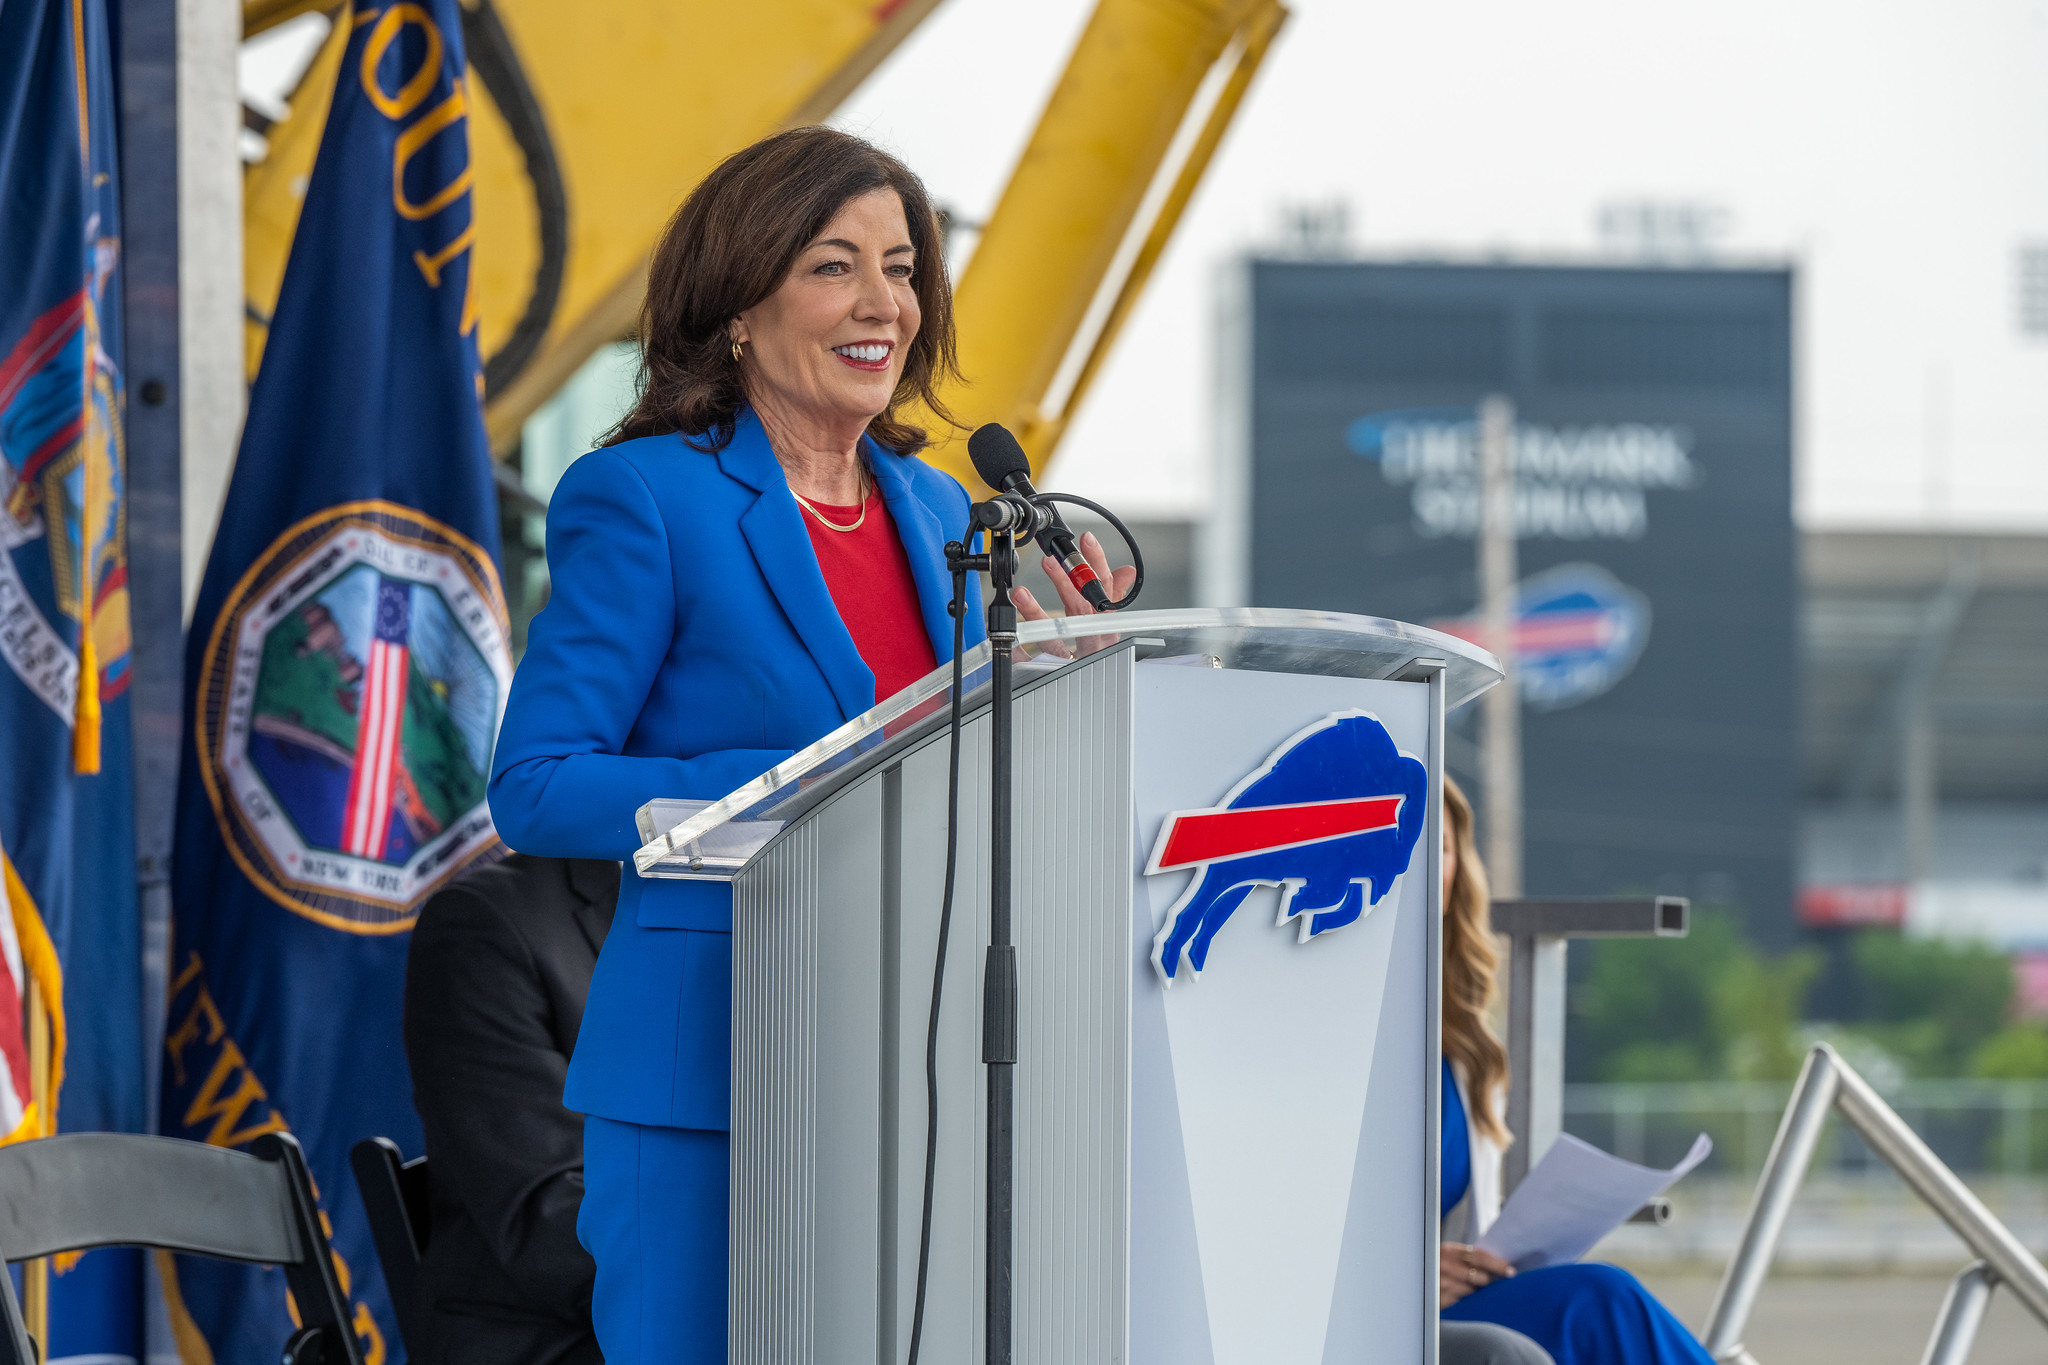 June 5, 2023 - Orchard Park, NY - Governor Hochul delivers remarks at the ground breaking for new Buffalo Bills stadium in Orchard Park. (Darren McGee/ Office of Governor Kathy Hochul)